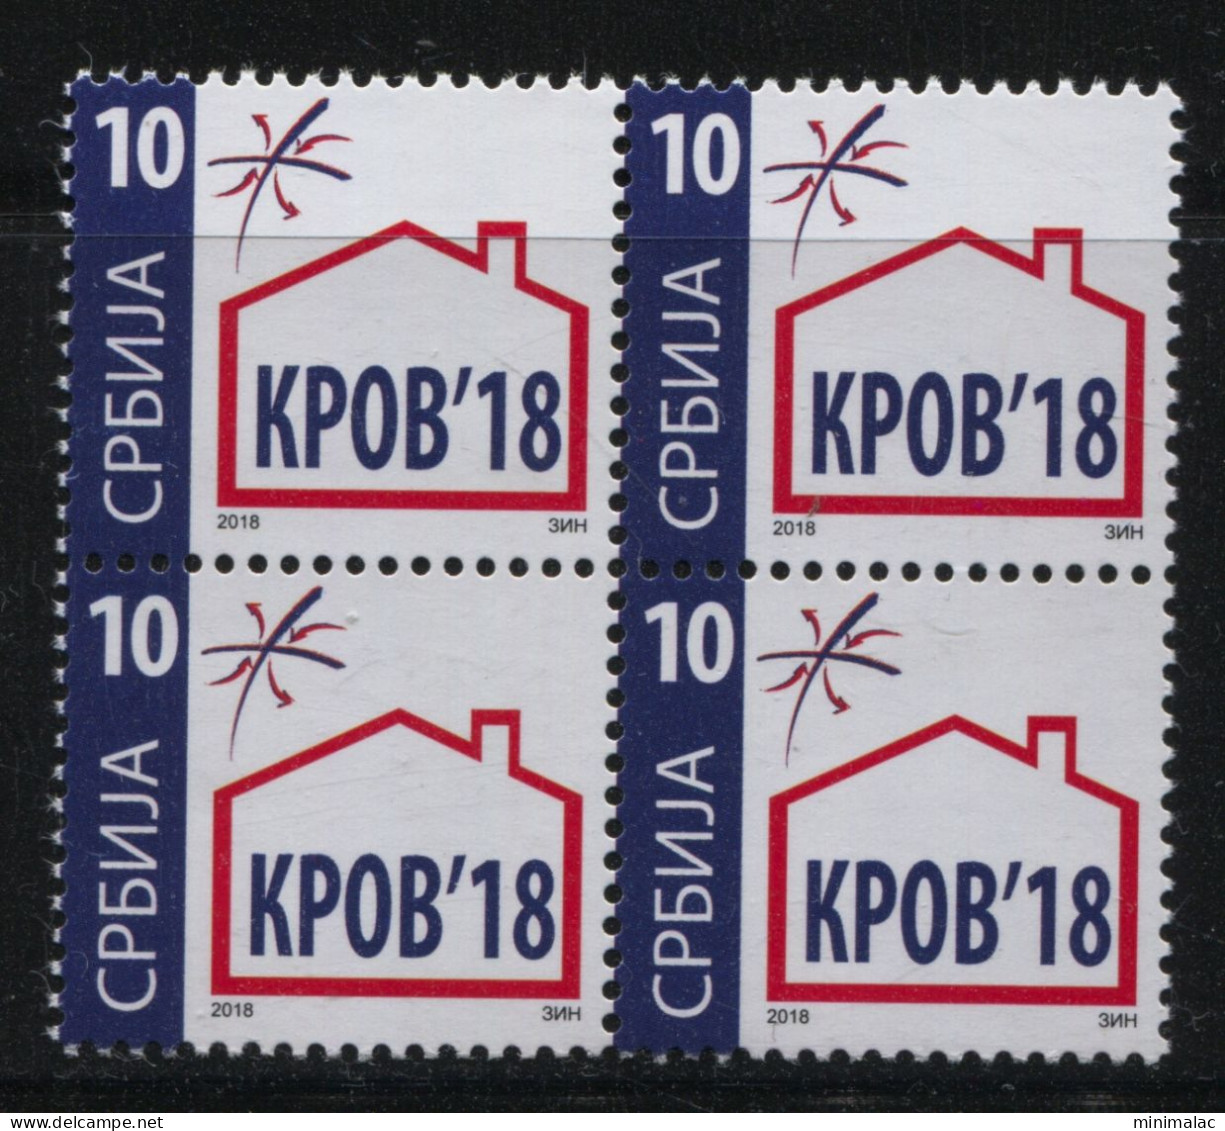 Serbia 2018, Roof For Refugees, Charity Stamp, Additional Stamp 10d, Block Of 4 MNH - Serbia